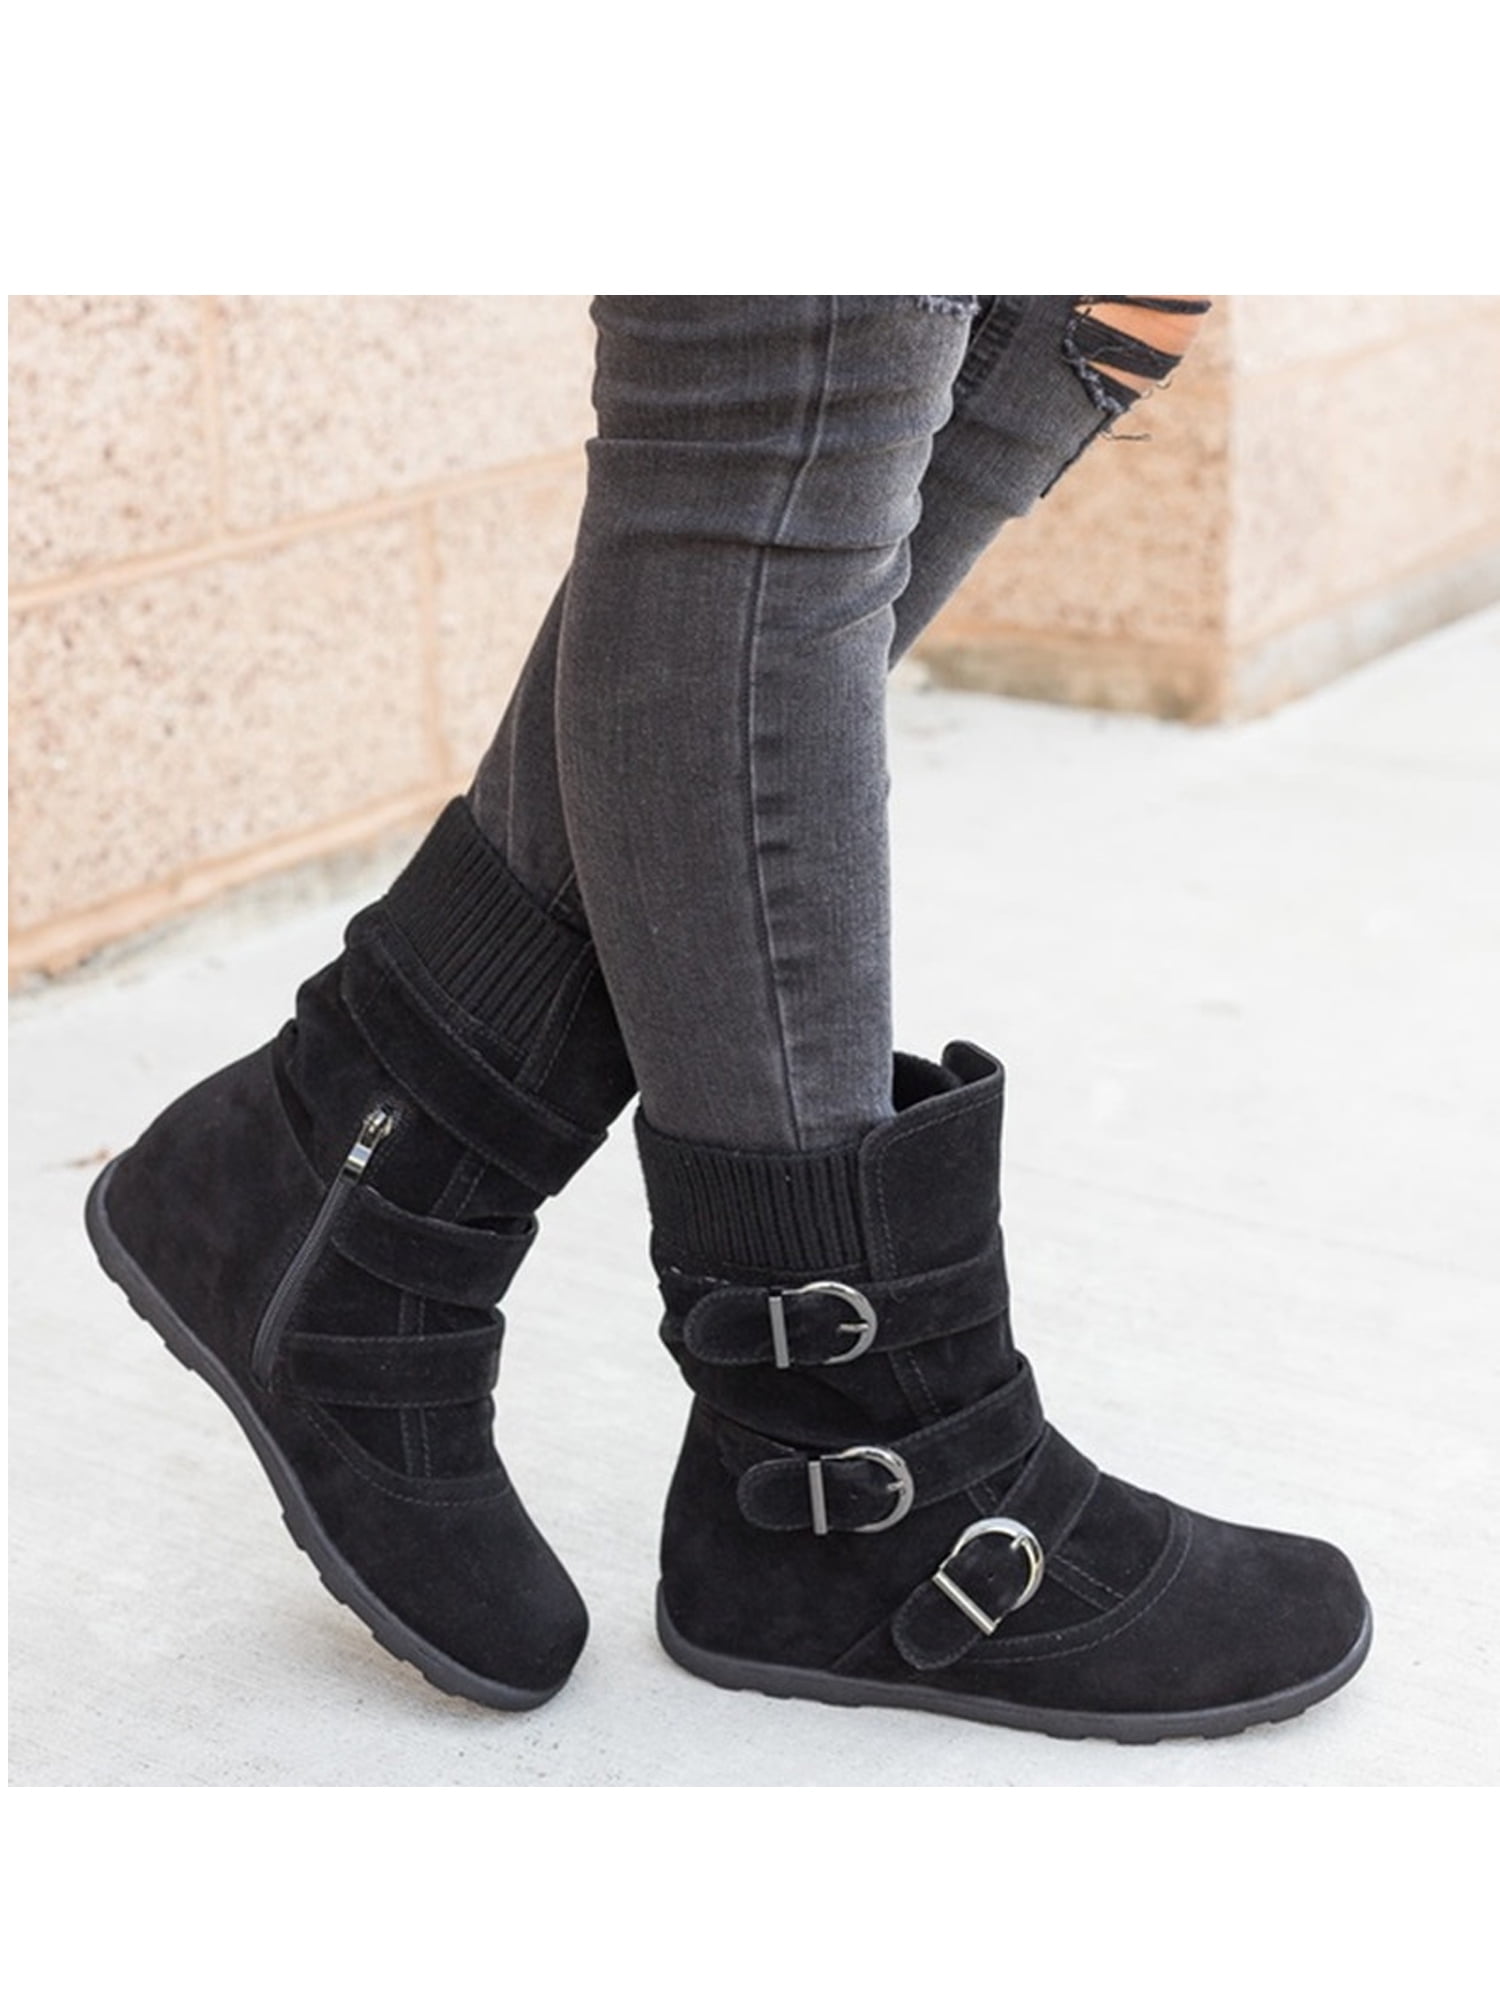 Details about   Knee High Boots Round Toe Faux Suede Womens   Casual Winter Warm Shoes Stylish##